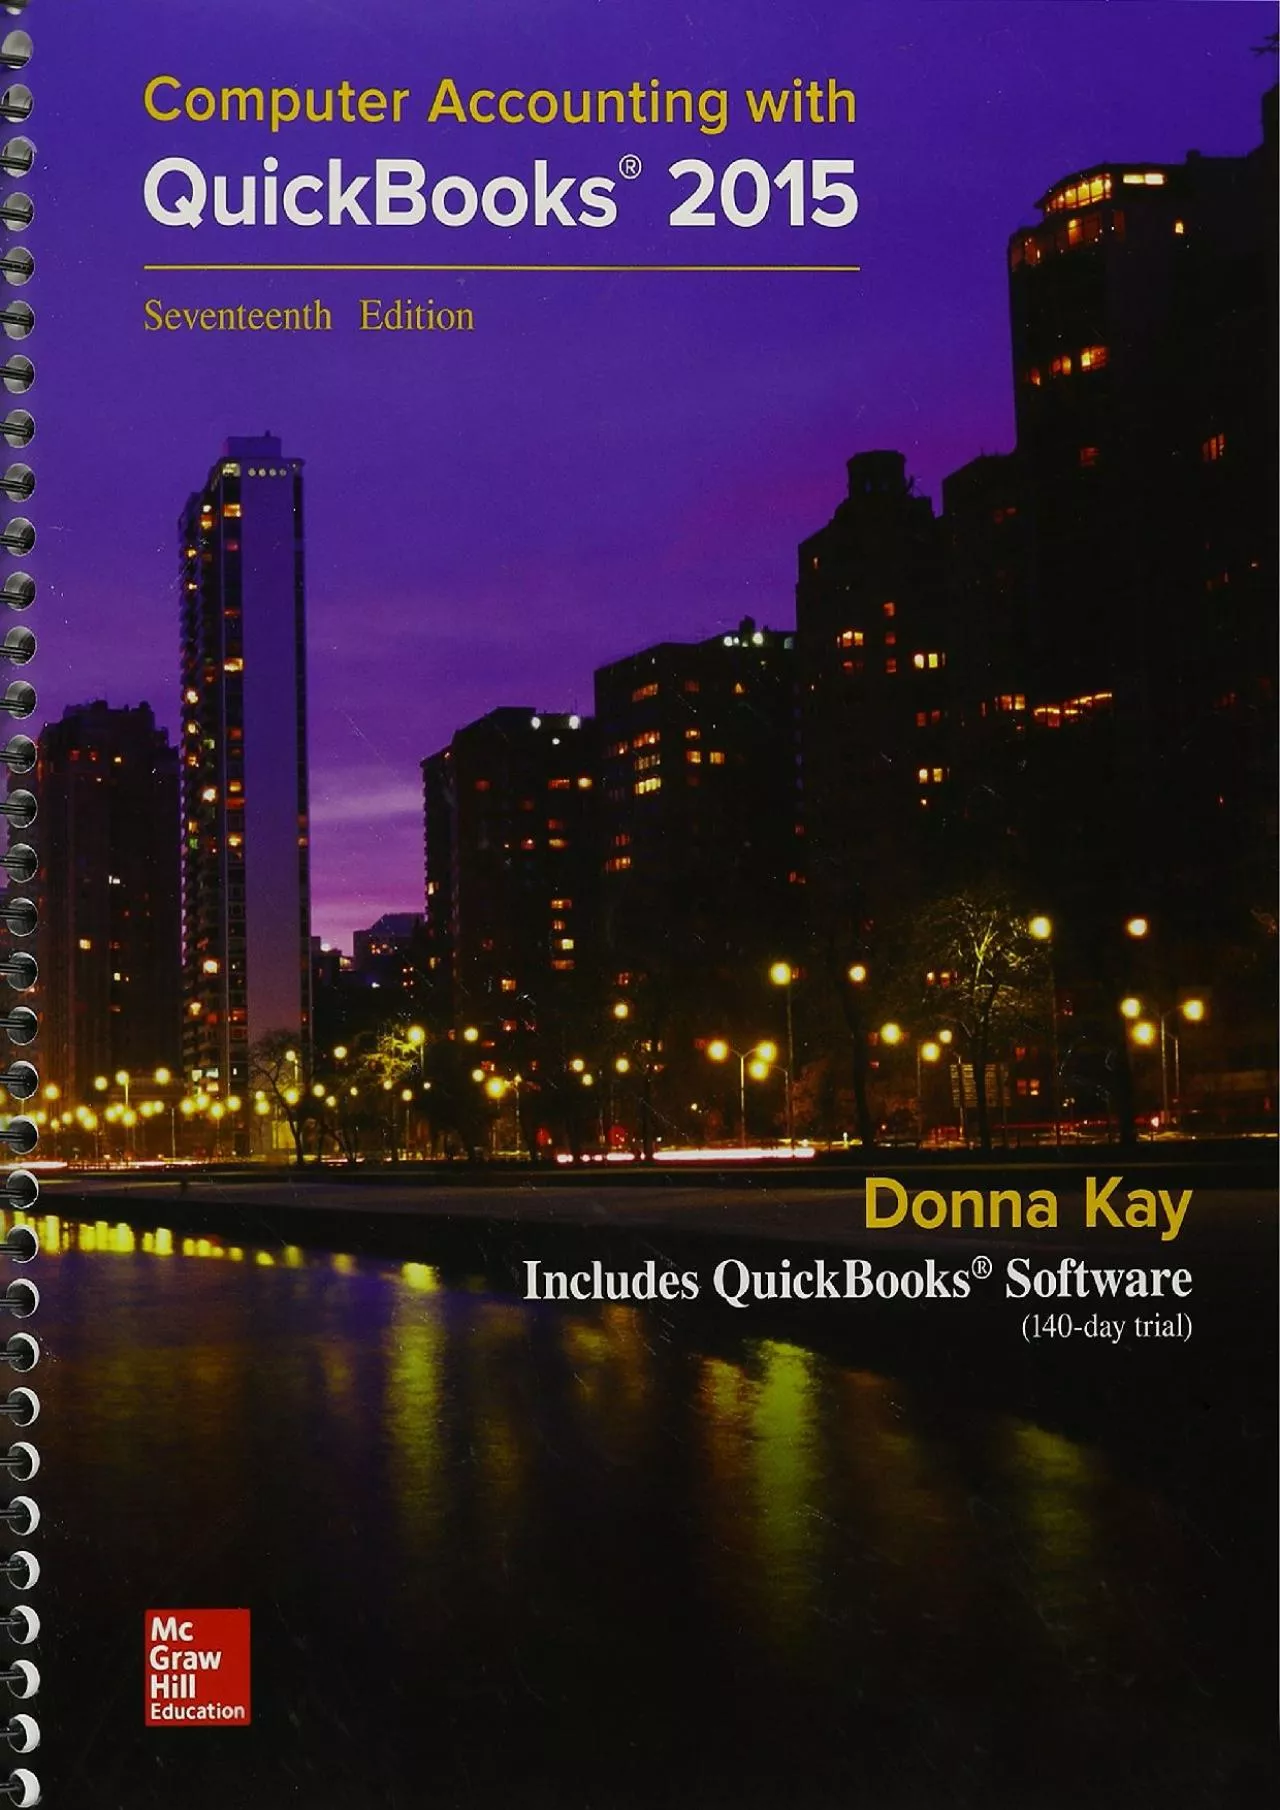 (BOOK)-GEN COMBO MP COMPUTER ACCOUNTING W/ QUICKBOOKS 2015 CD-ROM CONNECT AC